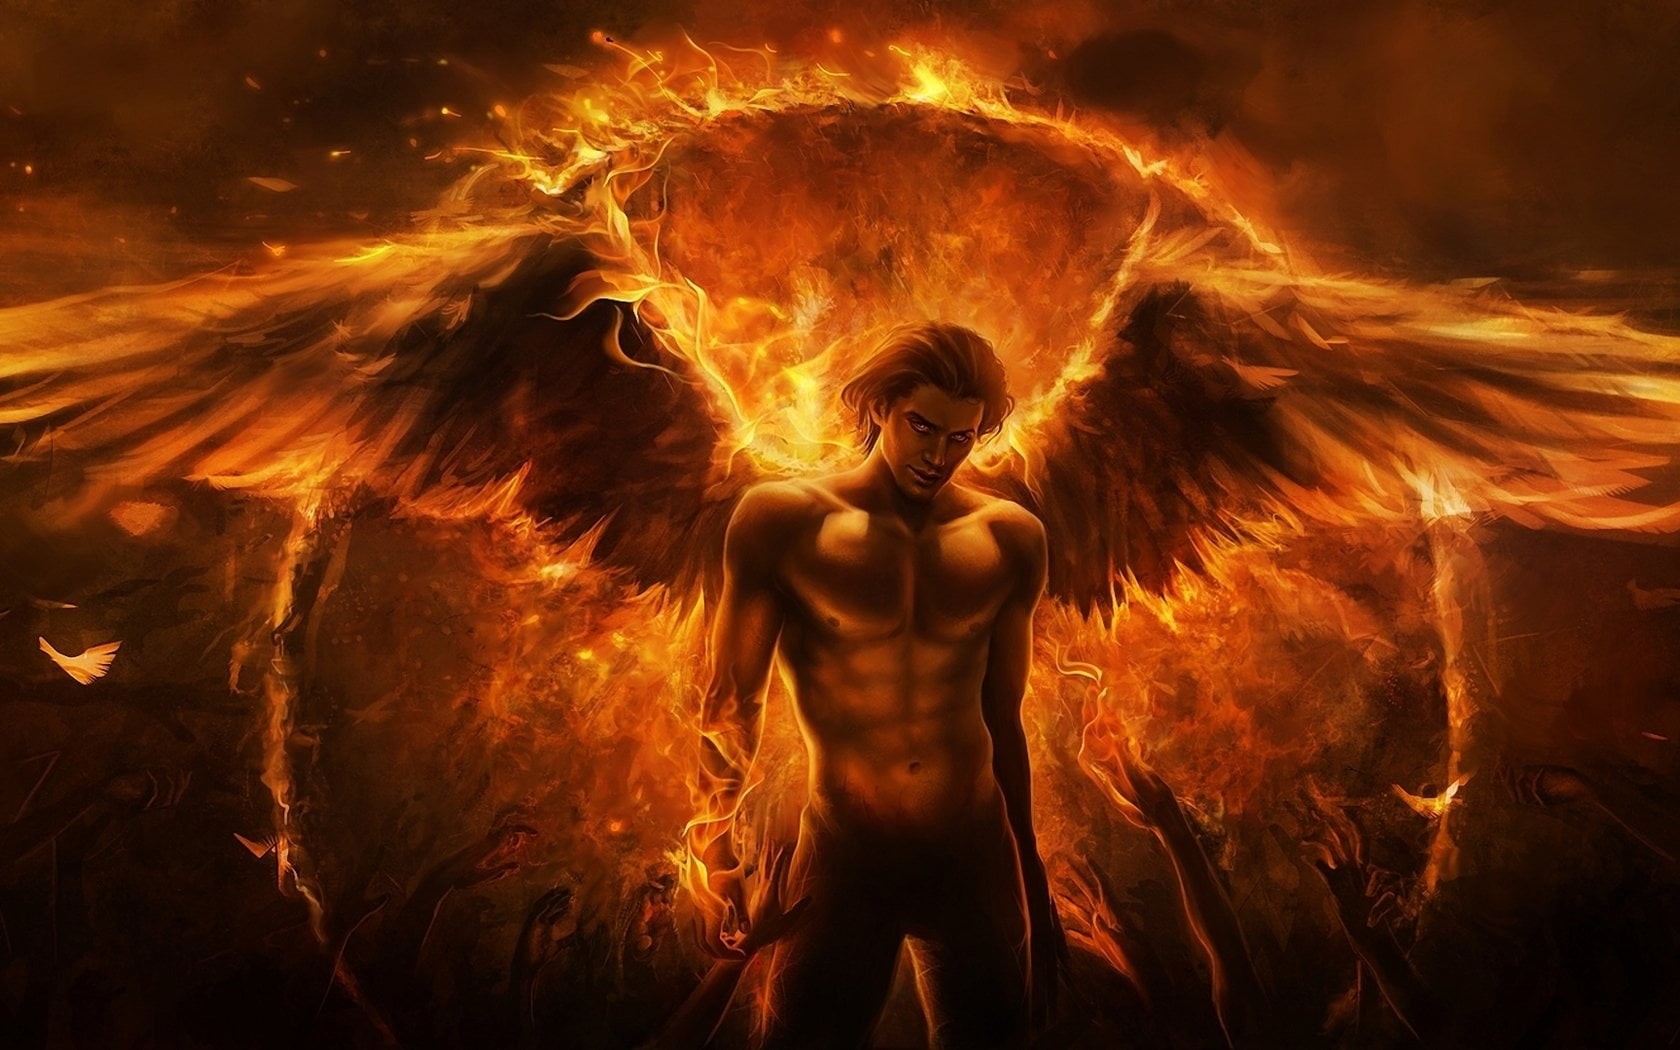 Wallpaper / communication, Dark, black background, front view, people, lucifer, Warrior, fire phenomenon, demon character, burning, motion, Angel free download